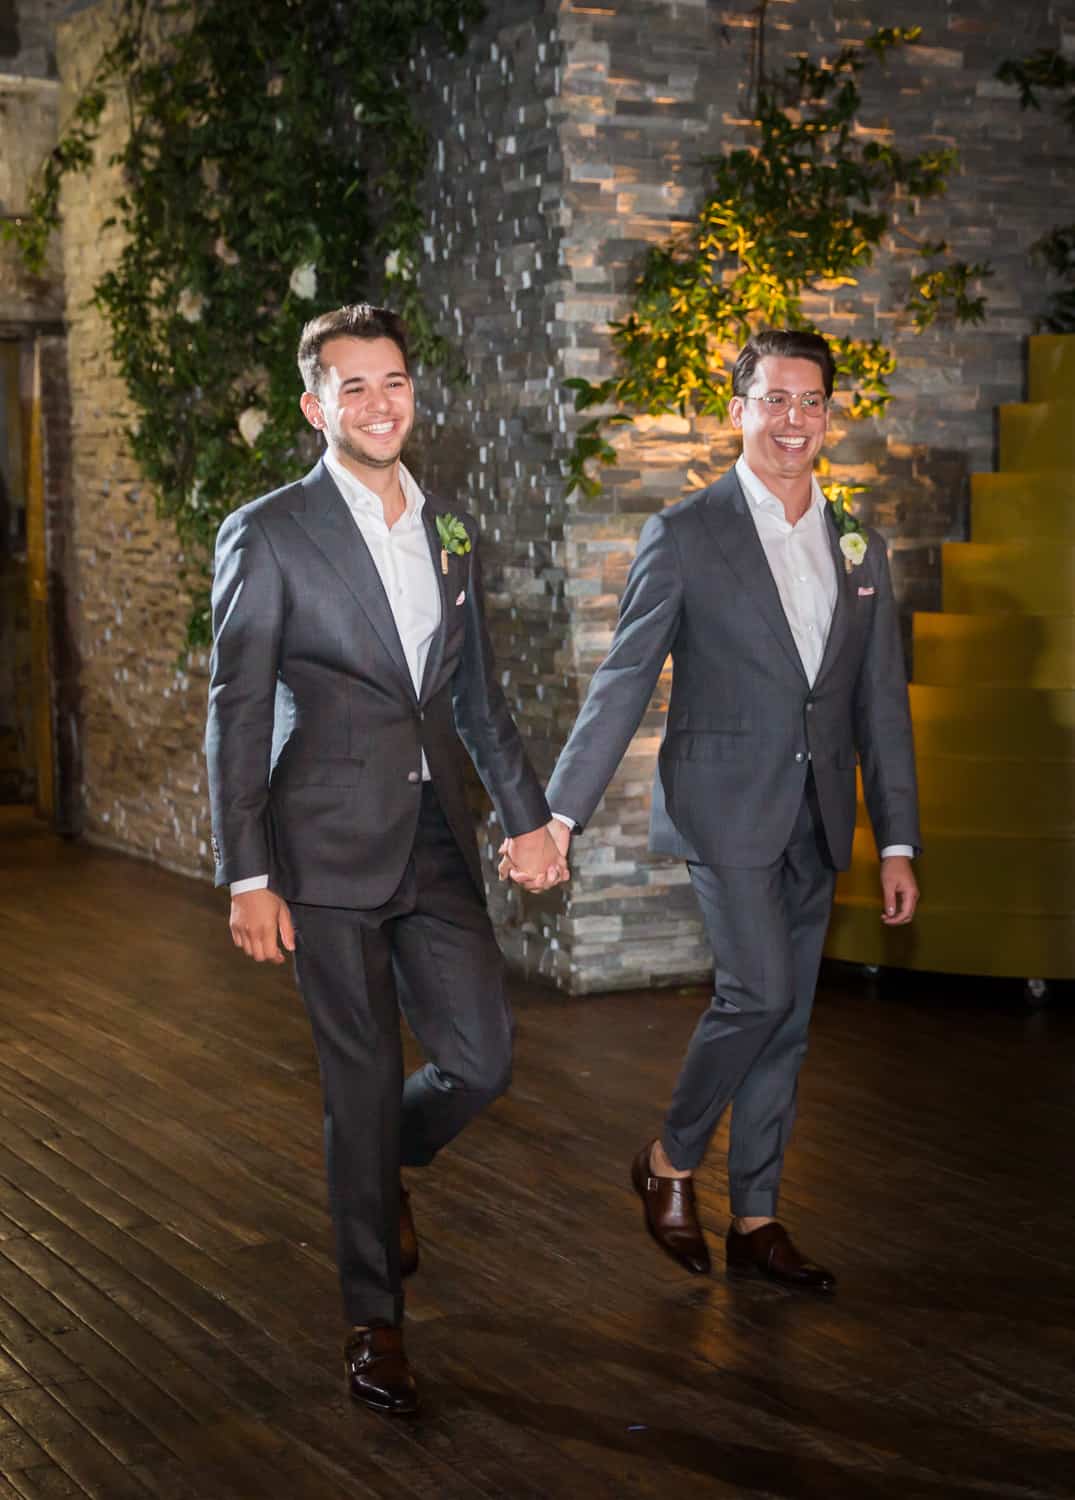 Greenpoint Loft wedding photos of two grooms entering reception